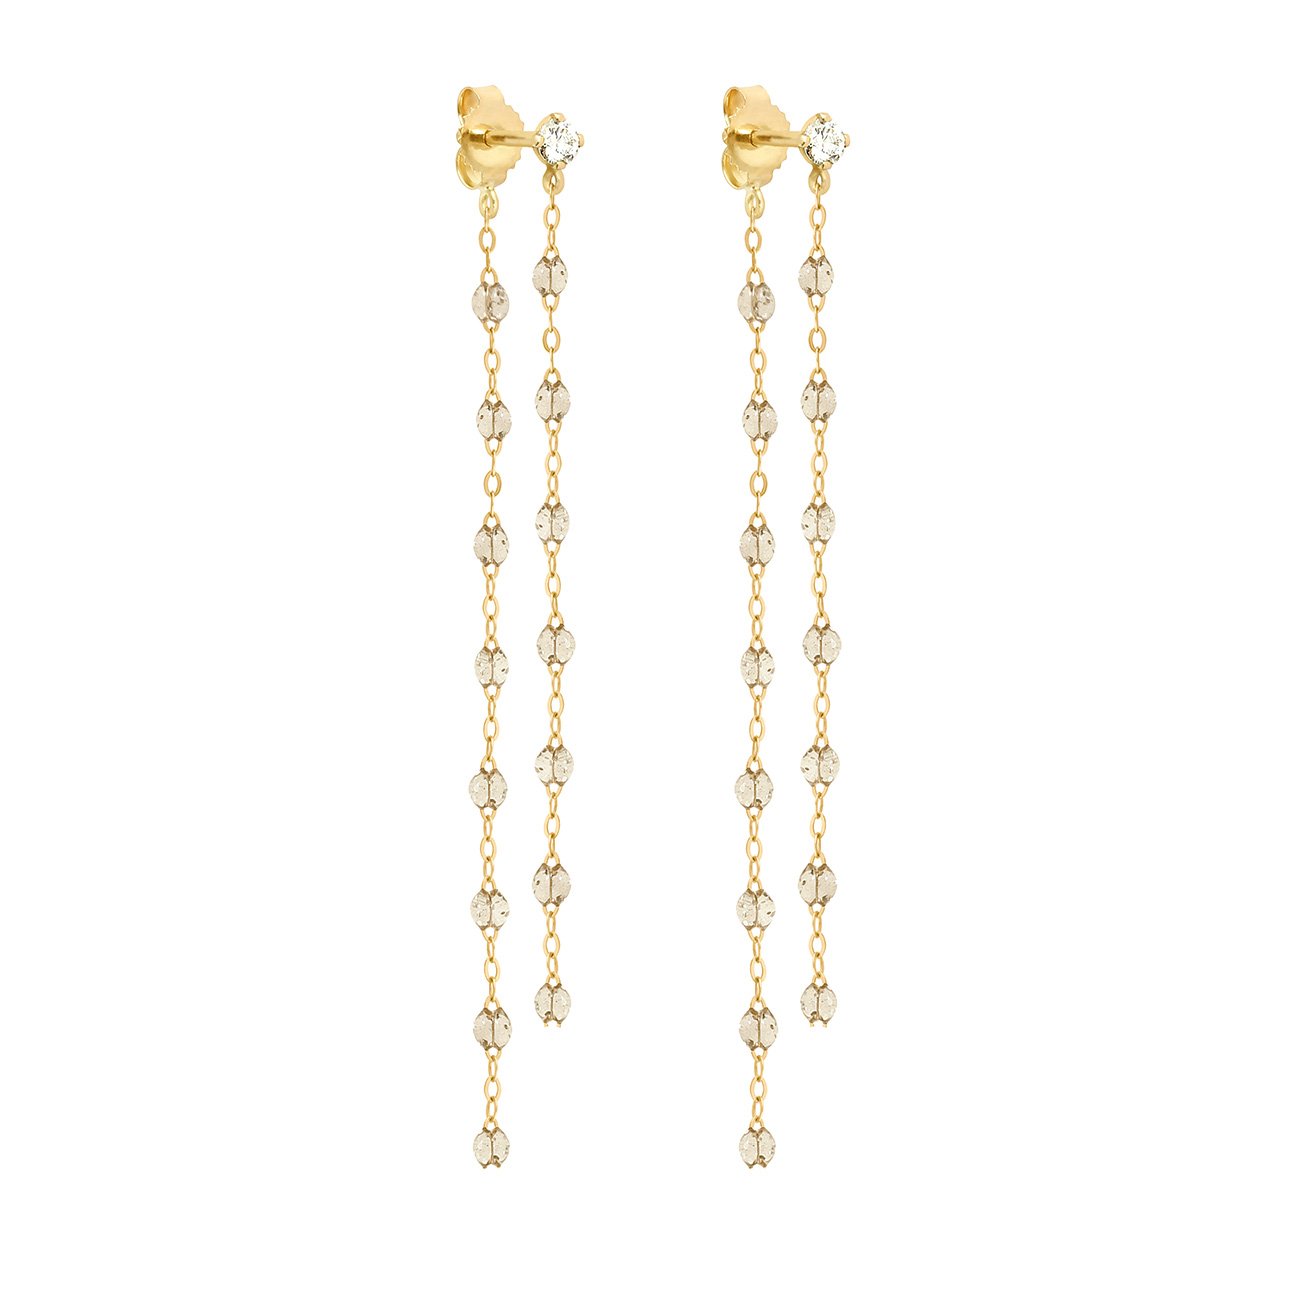 Celine Daoust Small Hoop Earring with Diamond 